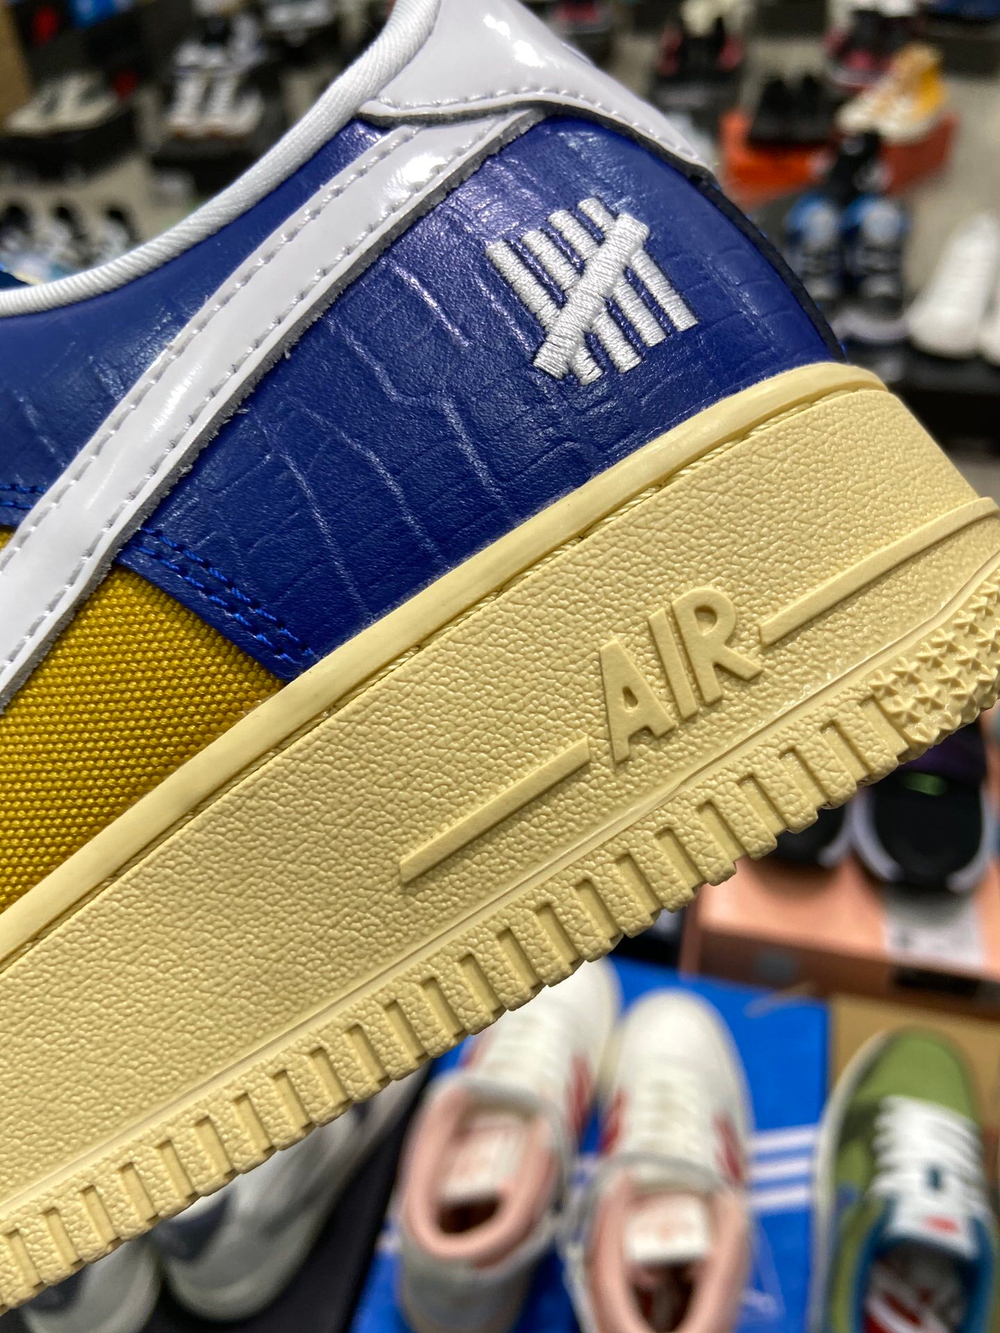 Nike Air Force 1 Low SP "Undefeated 5 On It Blue Yellow Croc"